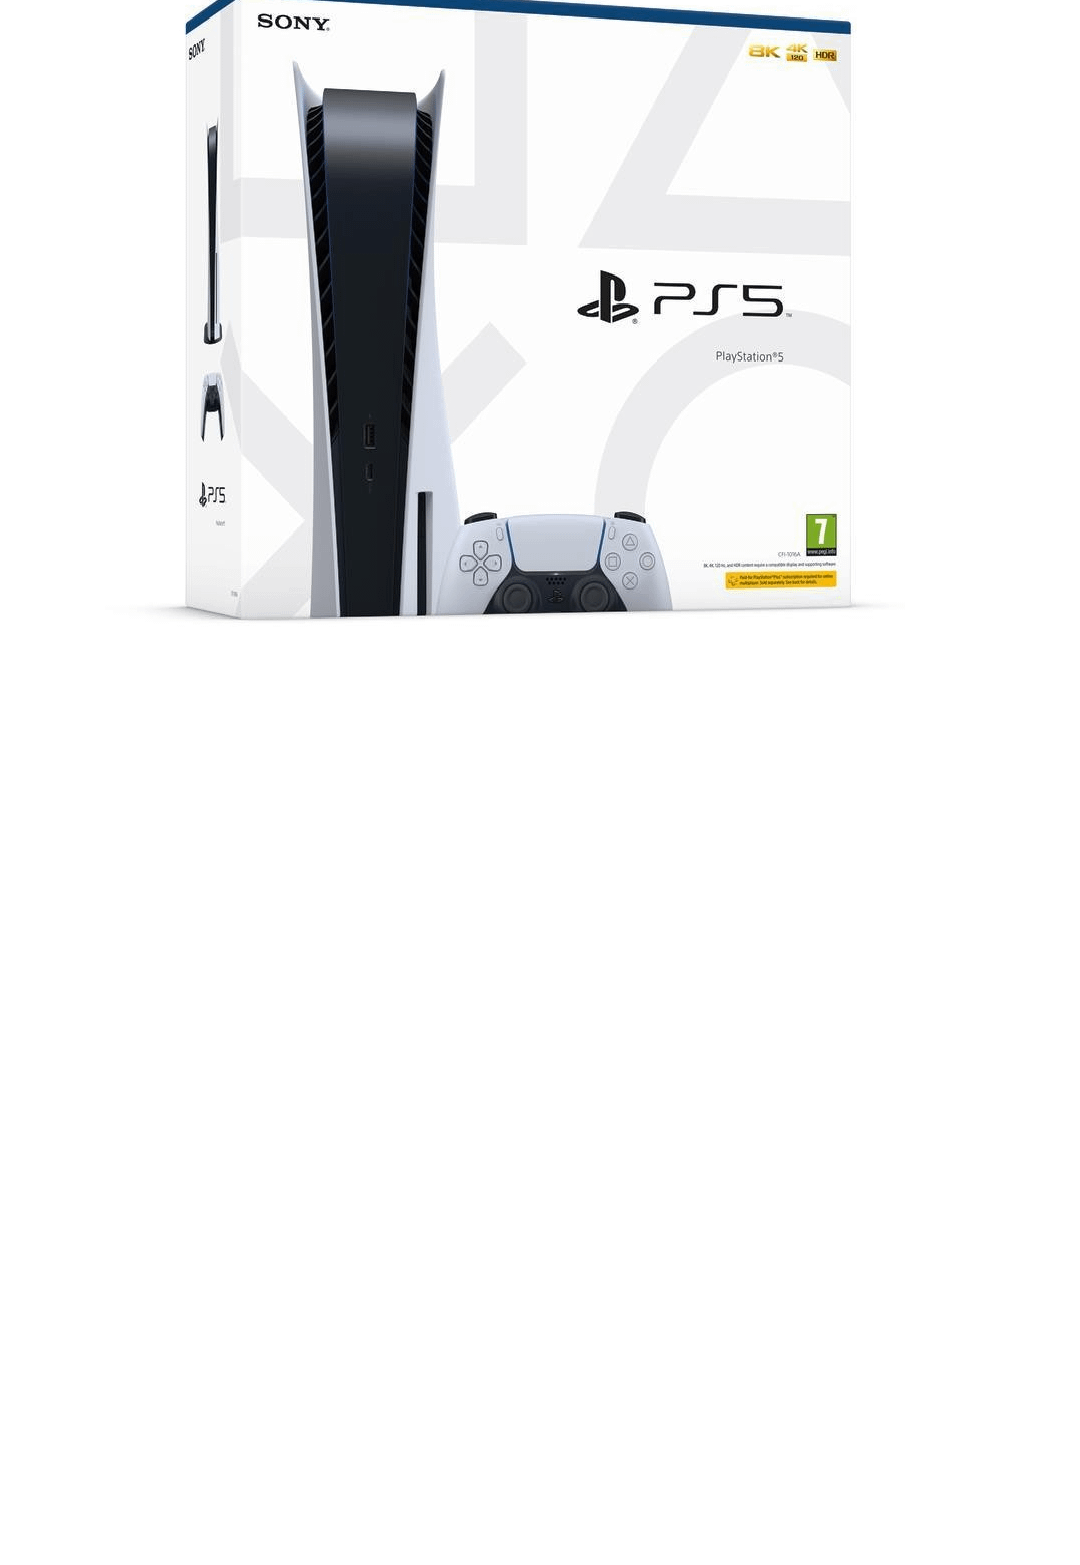 Sony CONSOLE PLAYSTATION 5 PS5 C CHASSIS 2023 825GB STANDARD EDITION NERO/BIANCO